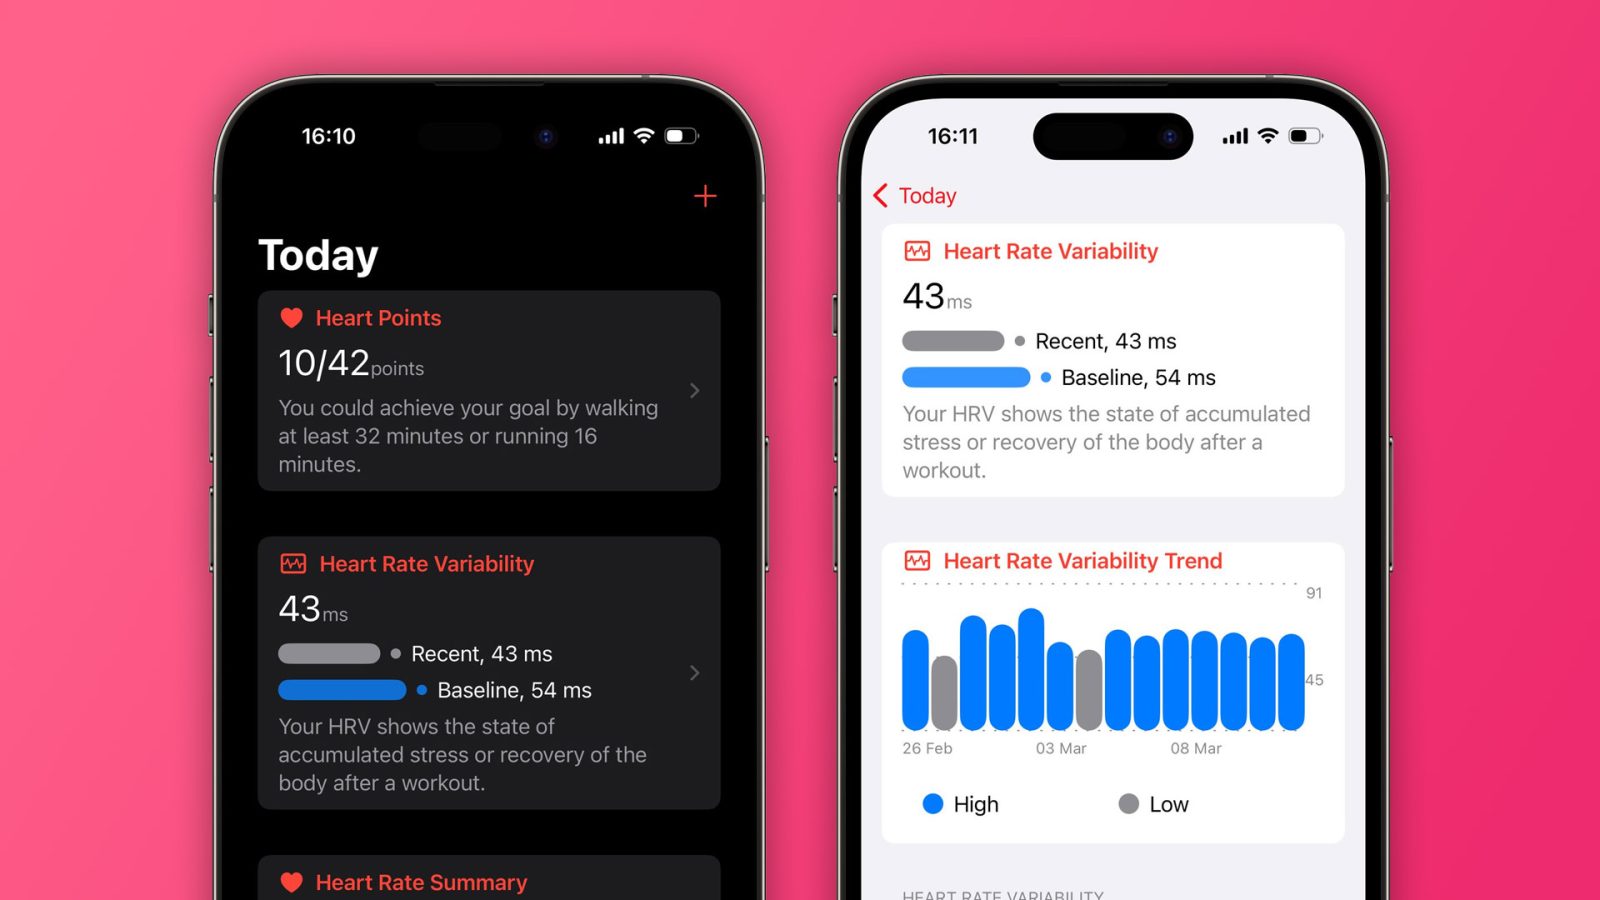 CardioBot can now measure stress levels based on your Apple Watch data